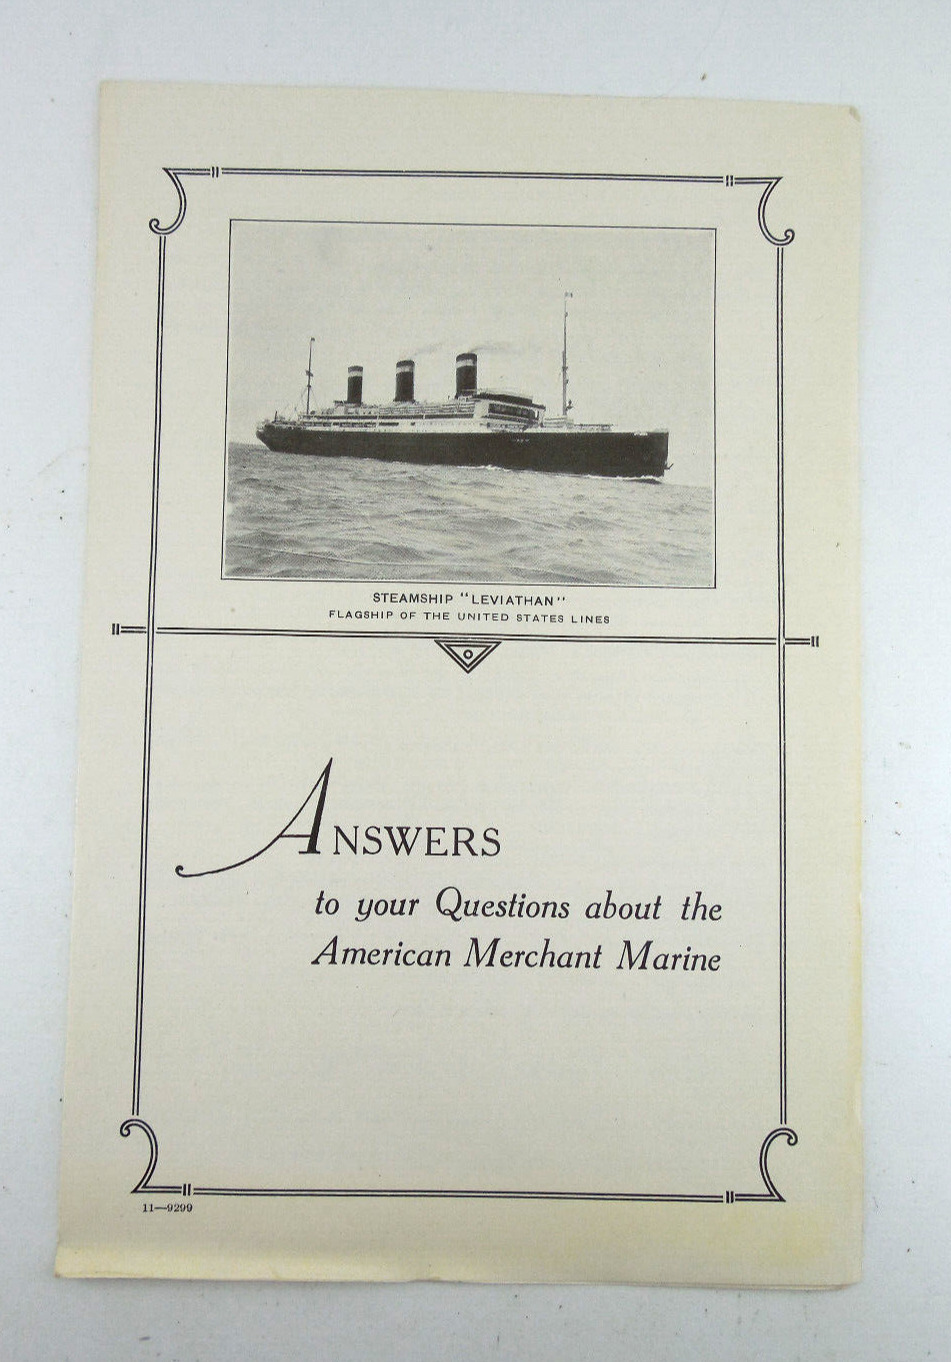 1927 Leviathan Steamship United States Line Ocean Liner Answers Merchant Marine